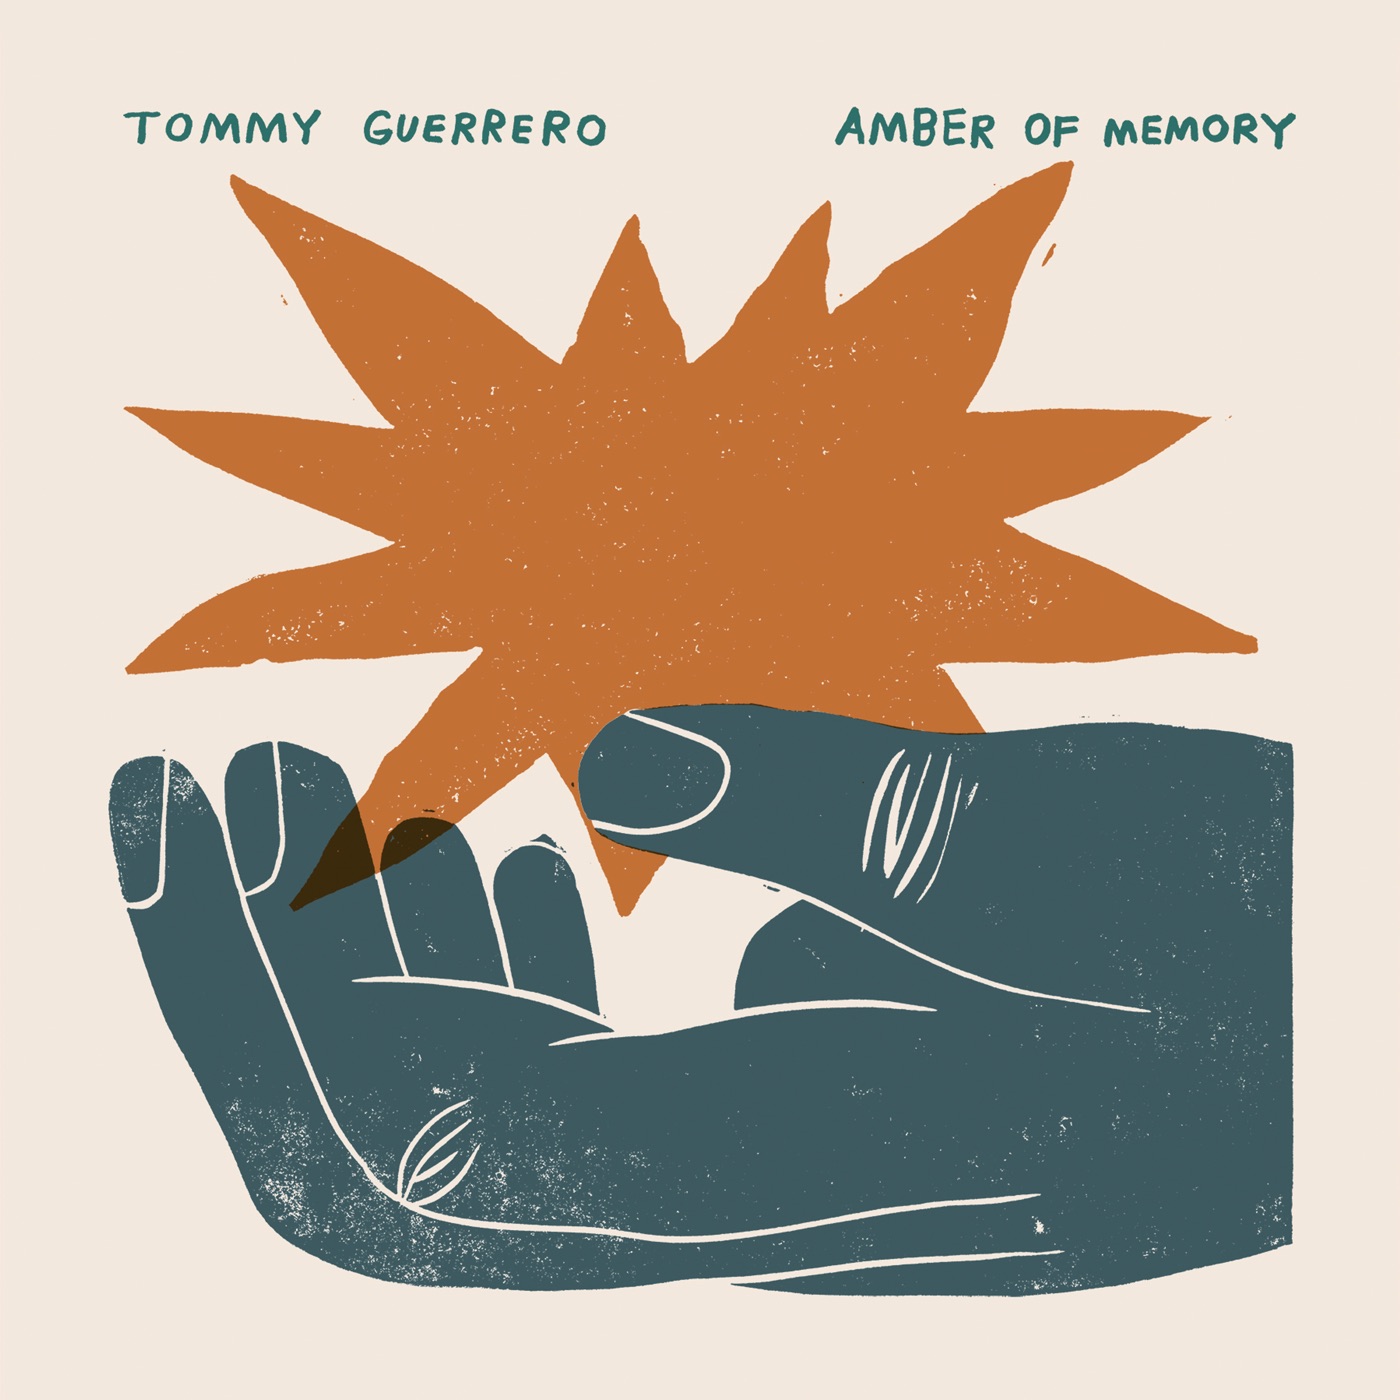 Amber of Memory by Tommy Guerrero